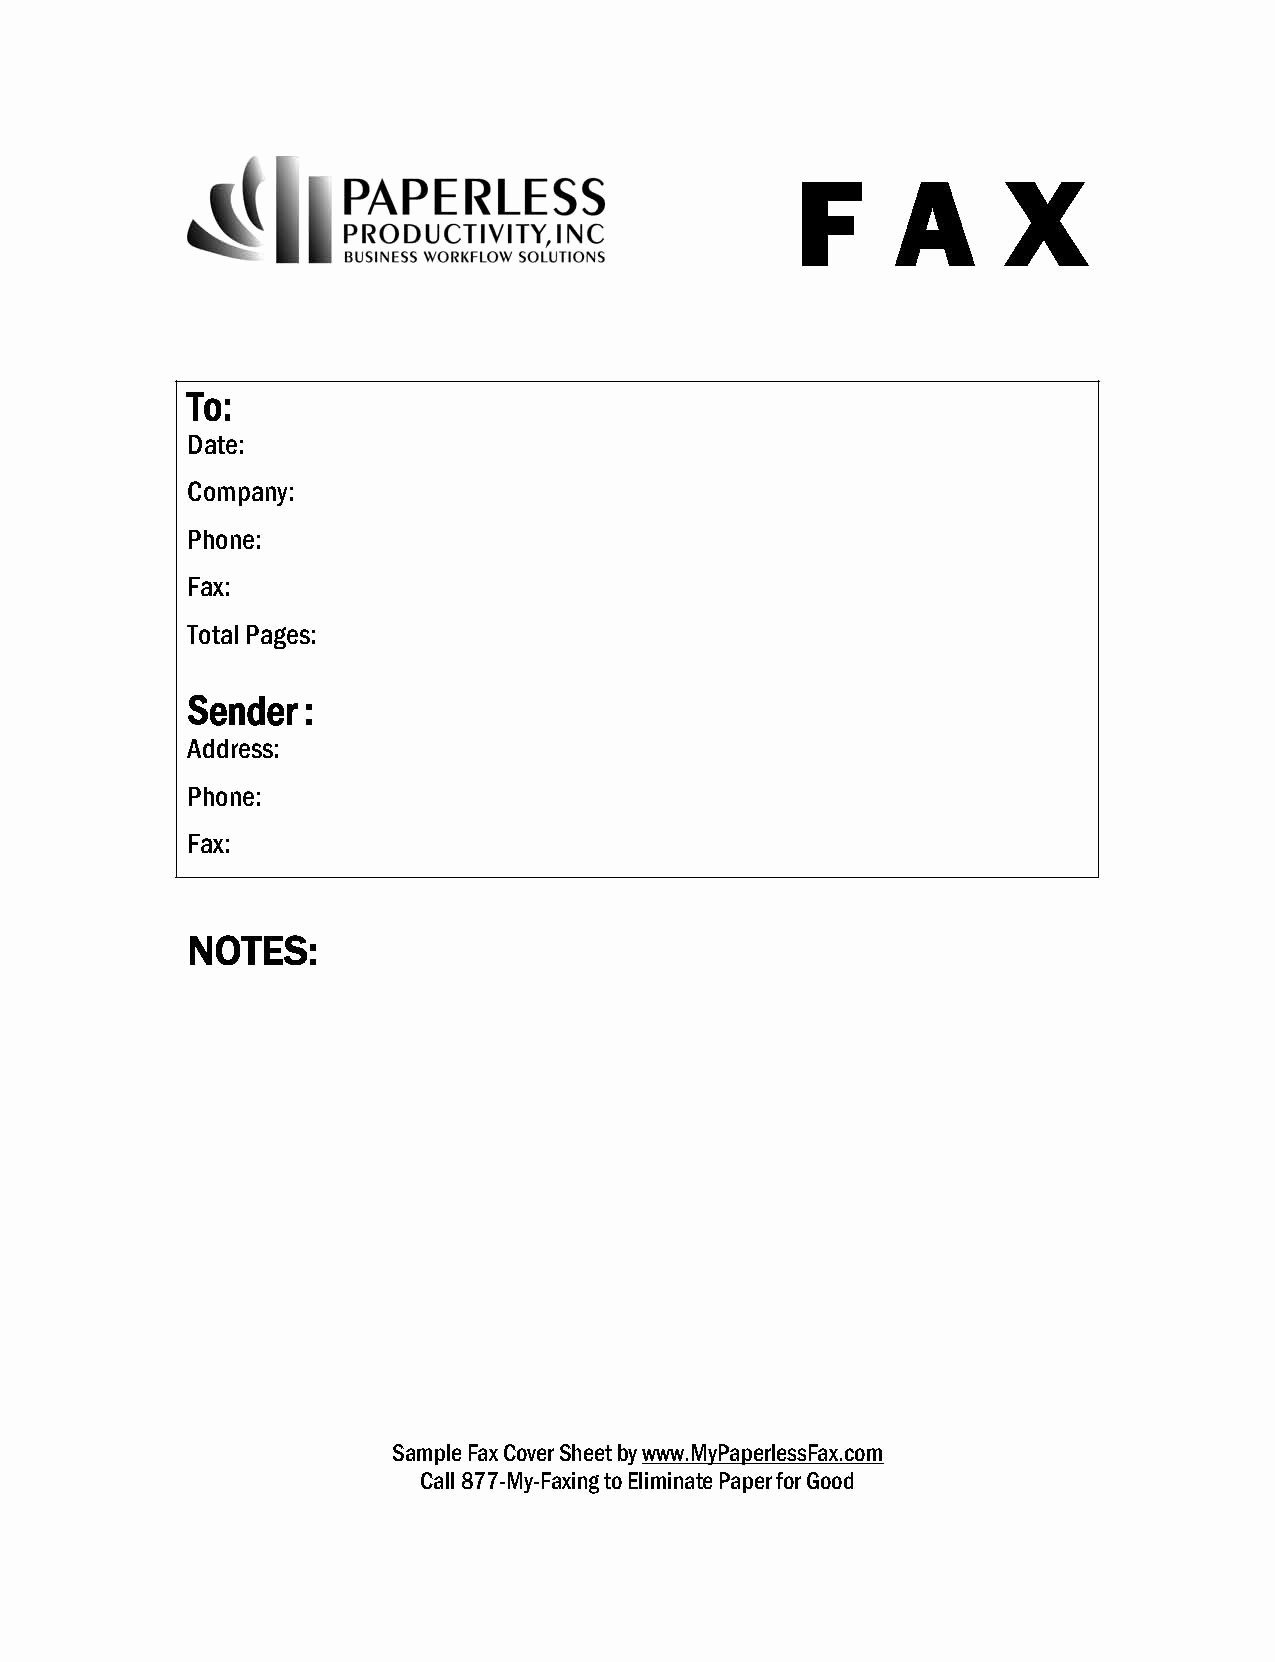 Examples Of Fax Cover Sheets Beautiful Blank Fax Cover Letter 2016 Samplebusinessresume